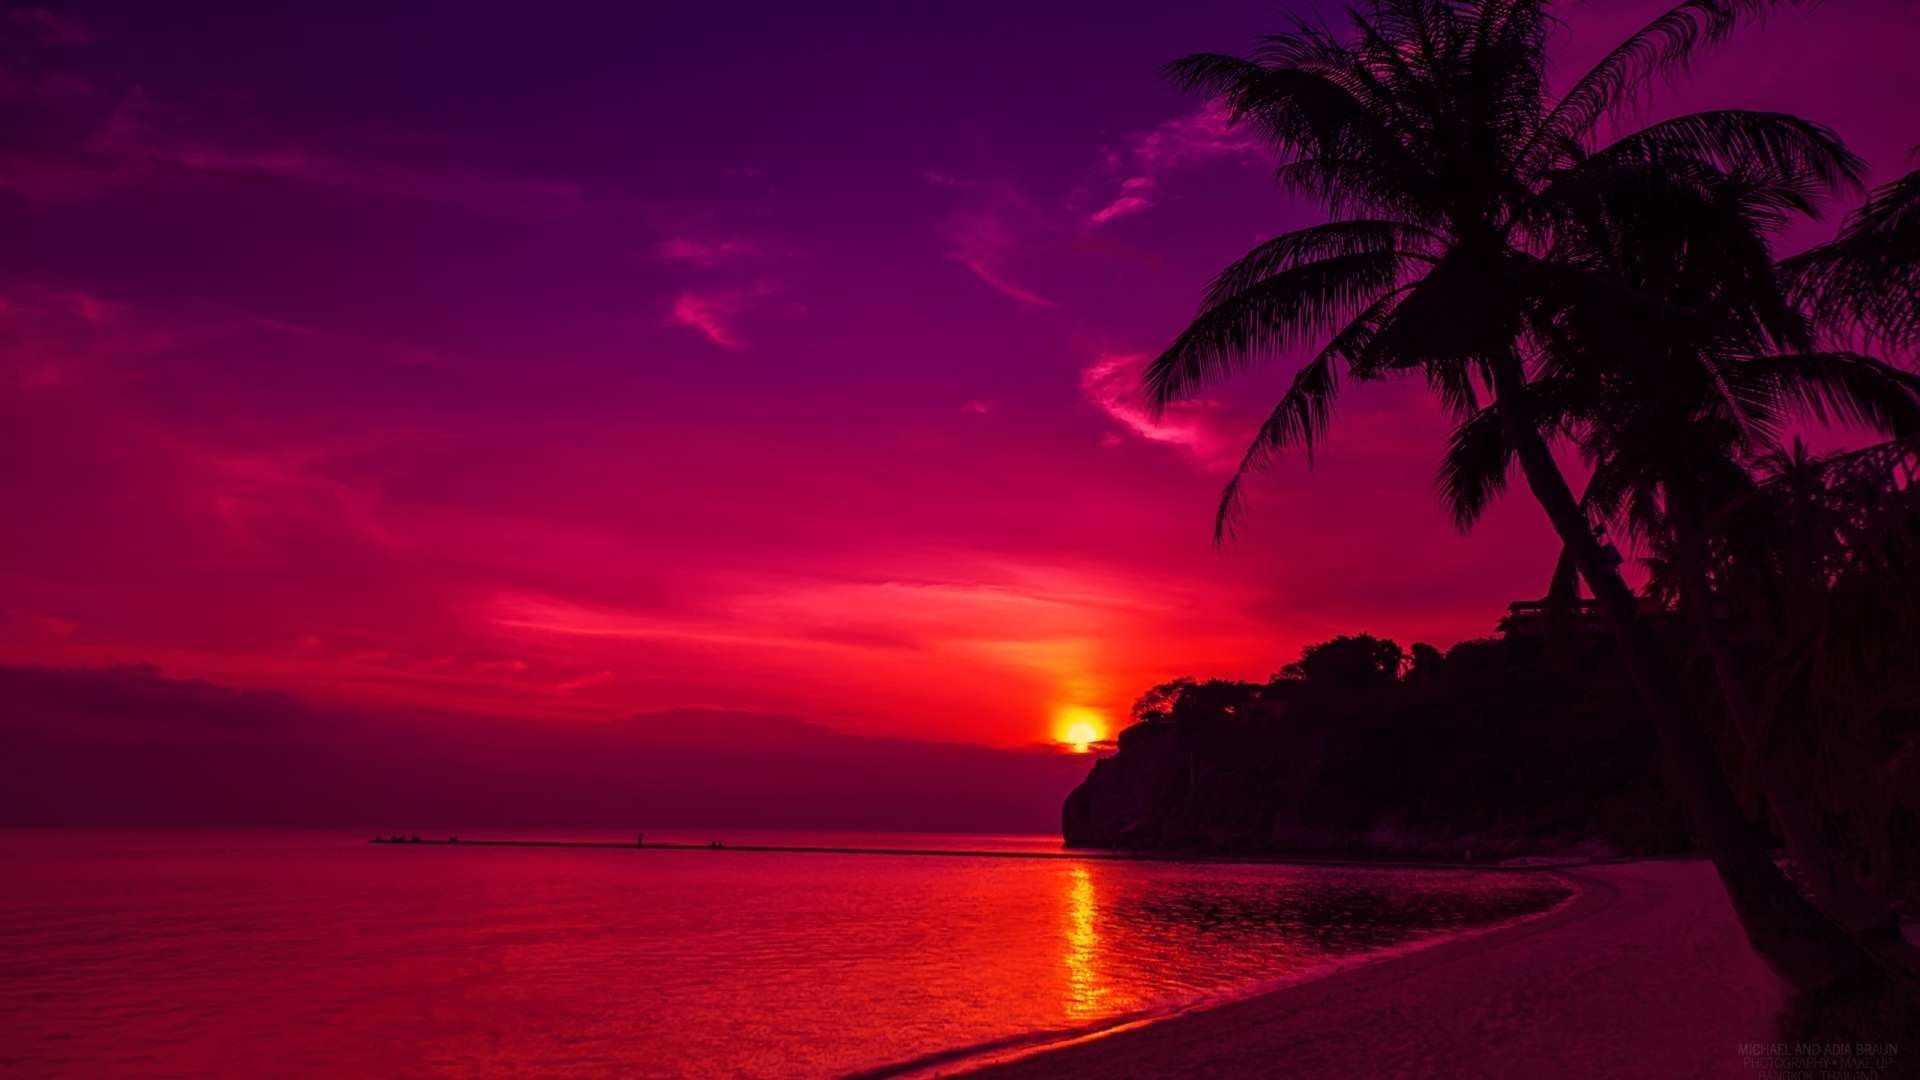 1920x1080 Wallpapers For > Hd Beach Sunset Wallpapers 1080p